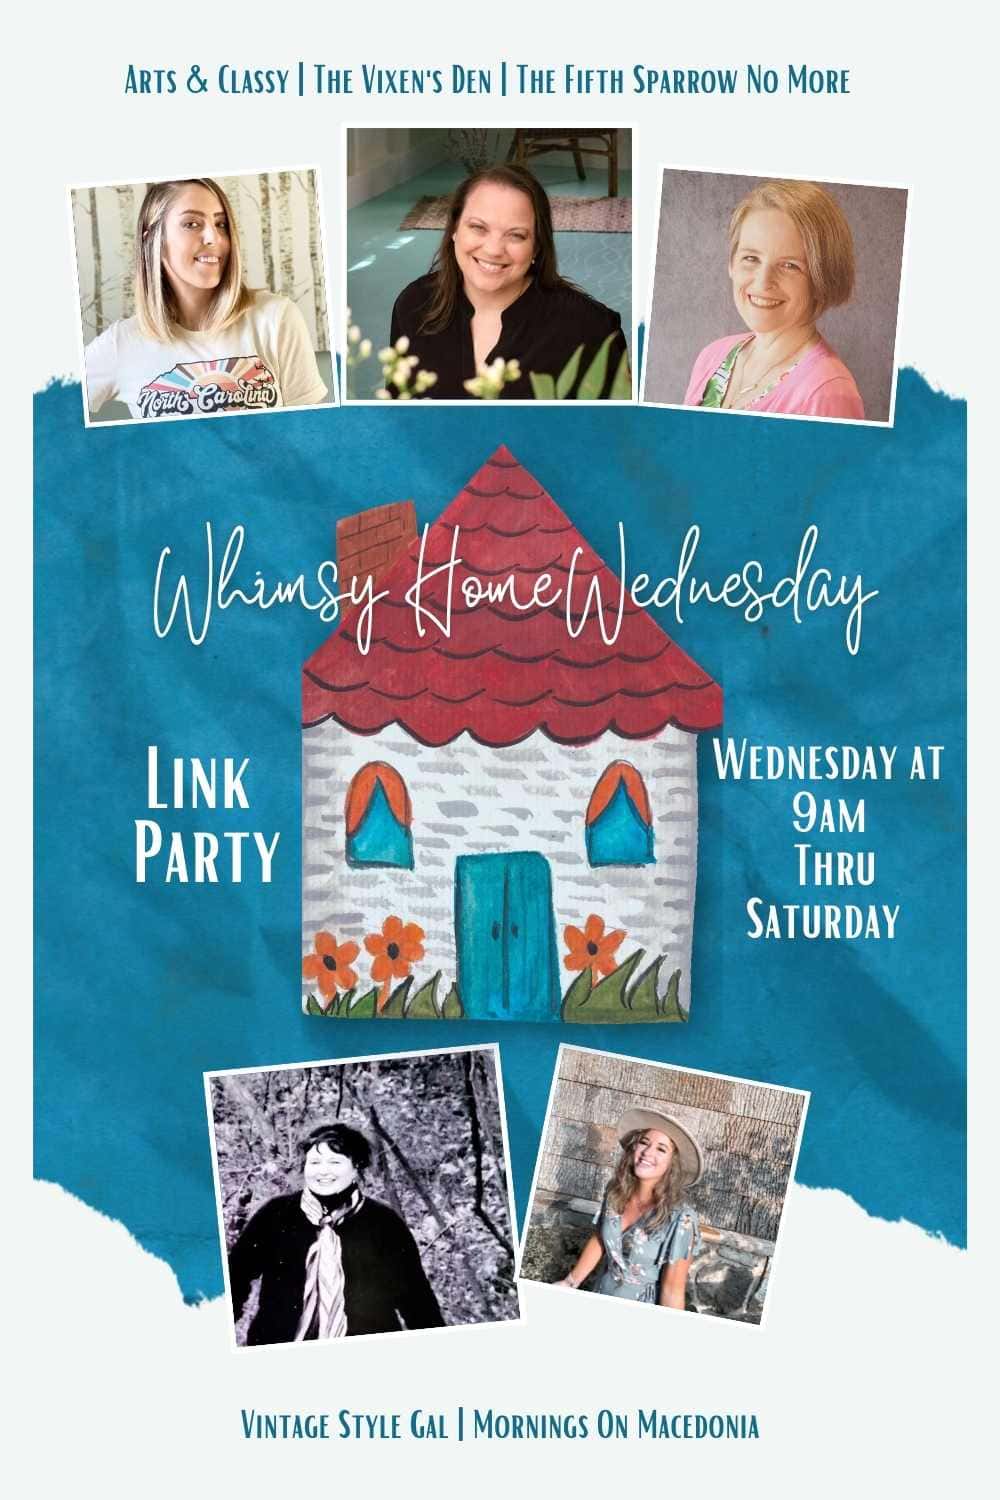 A New Linky Party!